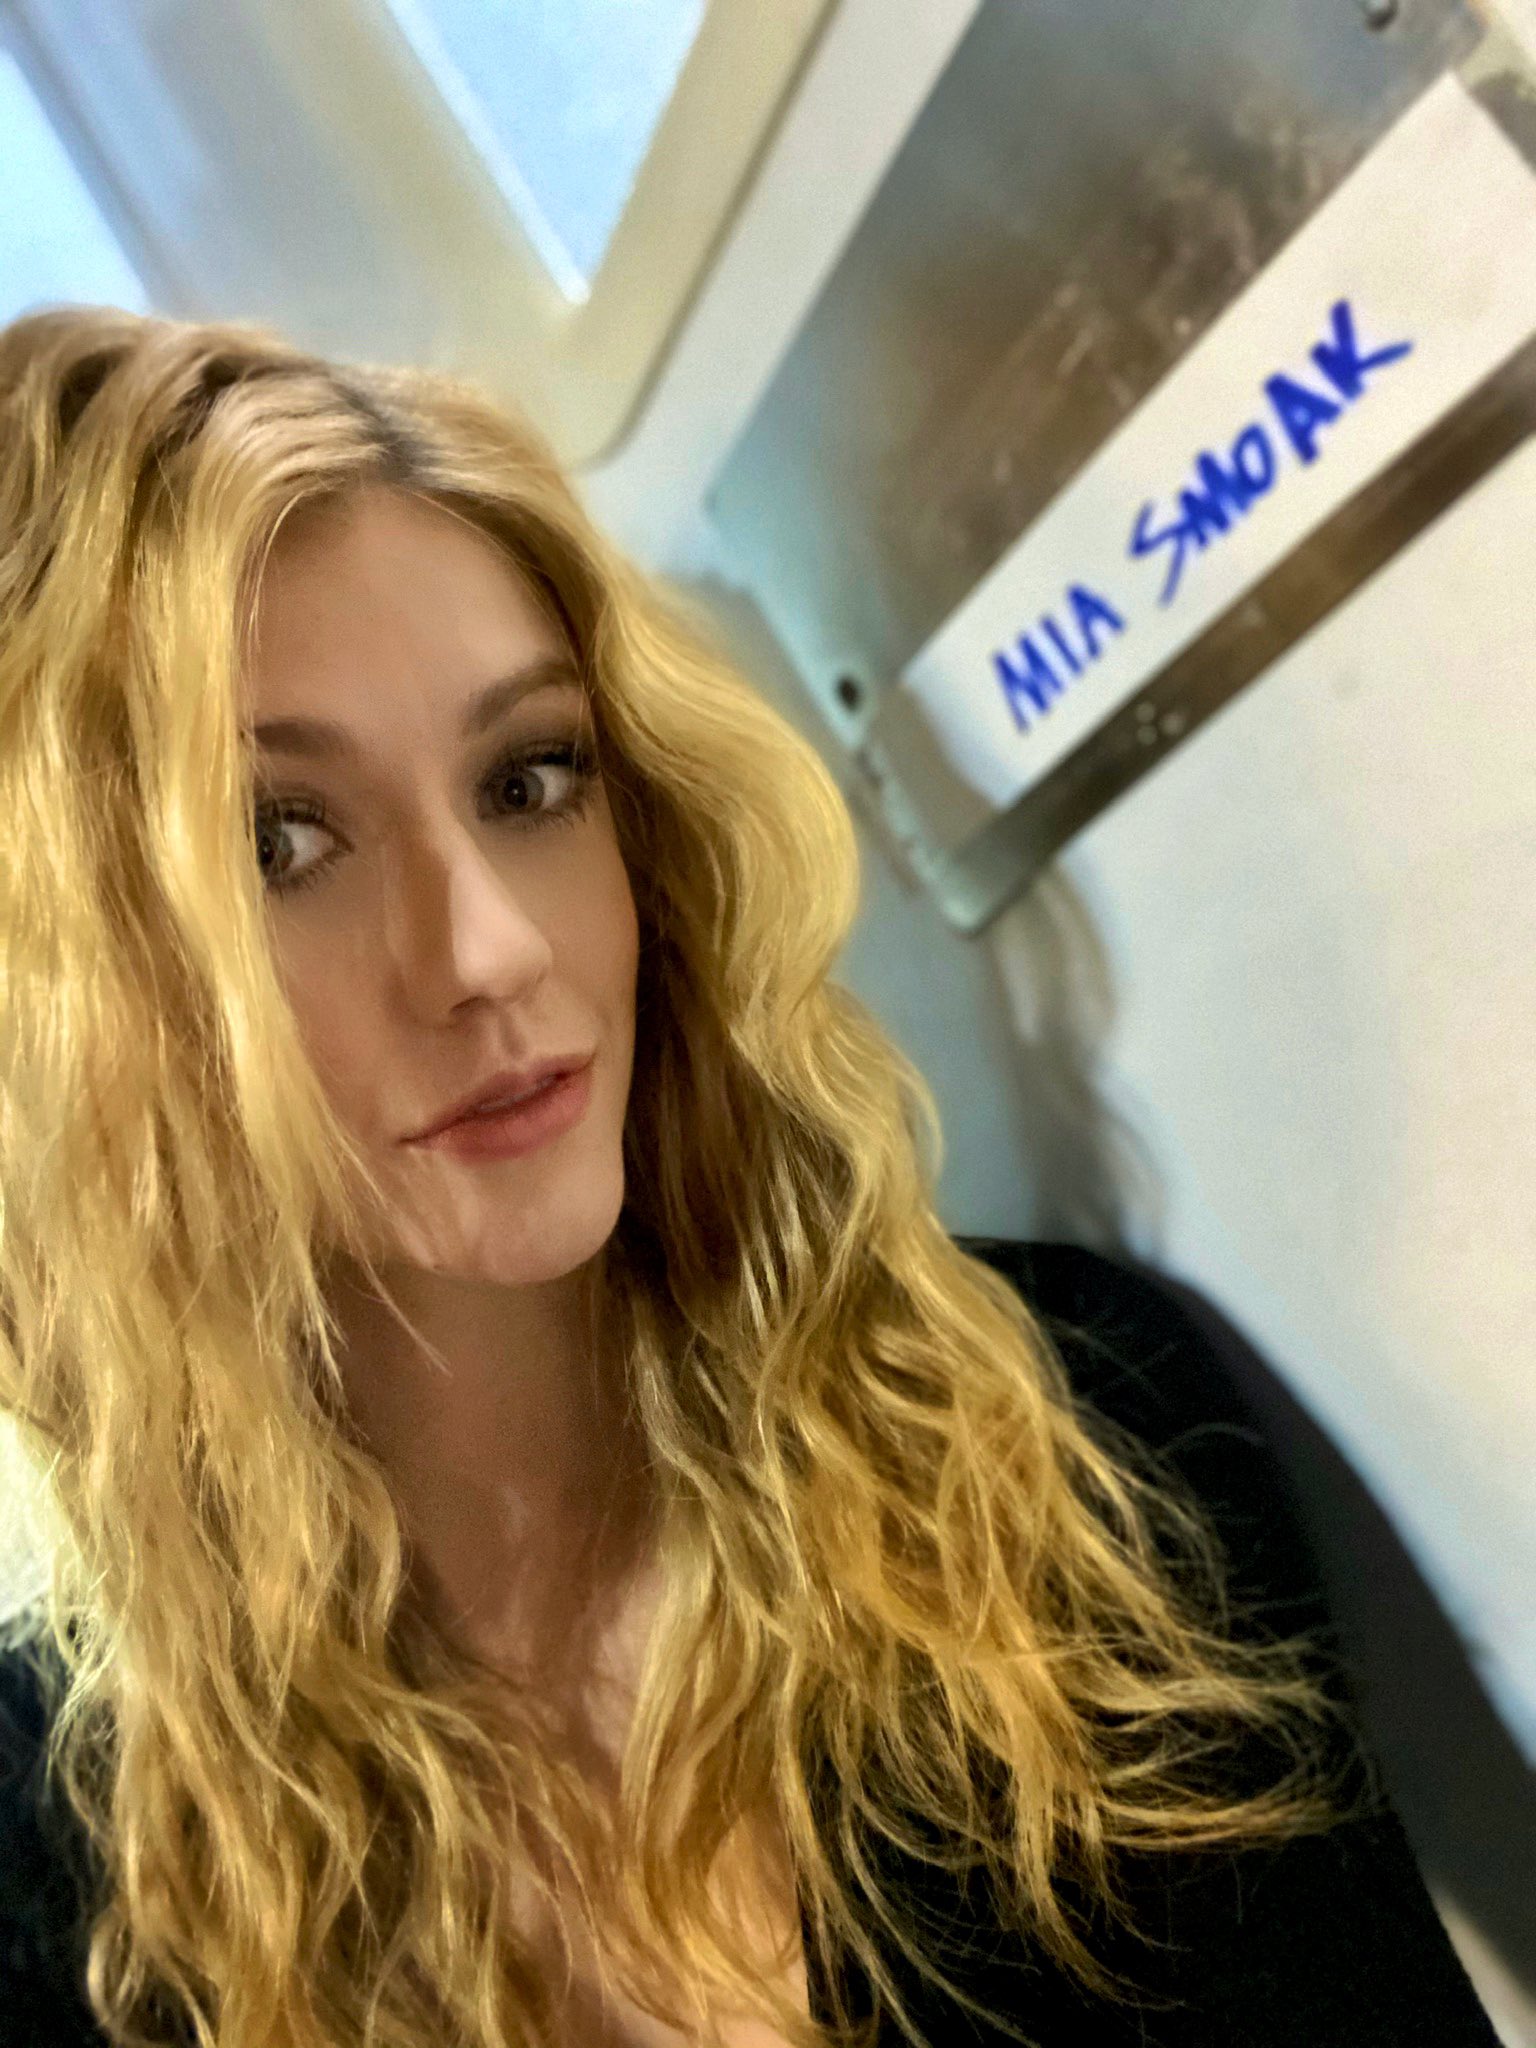 Katherine McNamara on Twitter: "Thank you, Mia Smoak-Queen... Here's to the  #GreenArrow, to #Olicity, and to the future, whatever it may hold.  #arrowseriesfinale #greenarrow #olicity #miasmoak #miaqueen #olicitybaby # arrow #thefinalbow #arrowfinale ...